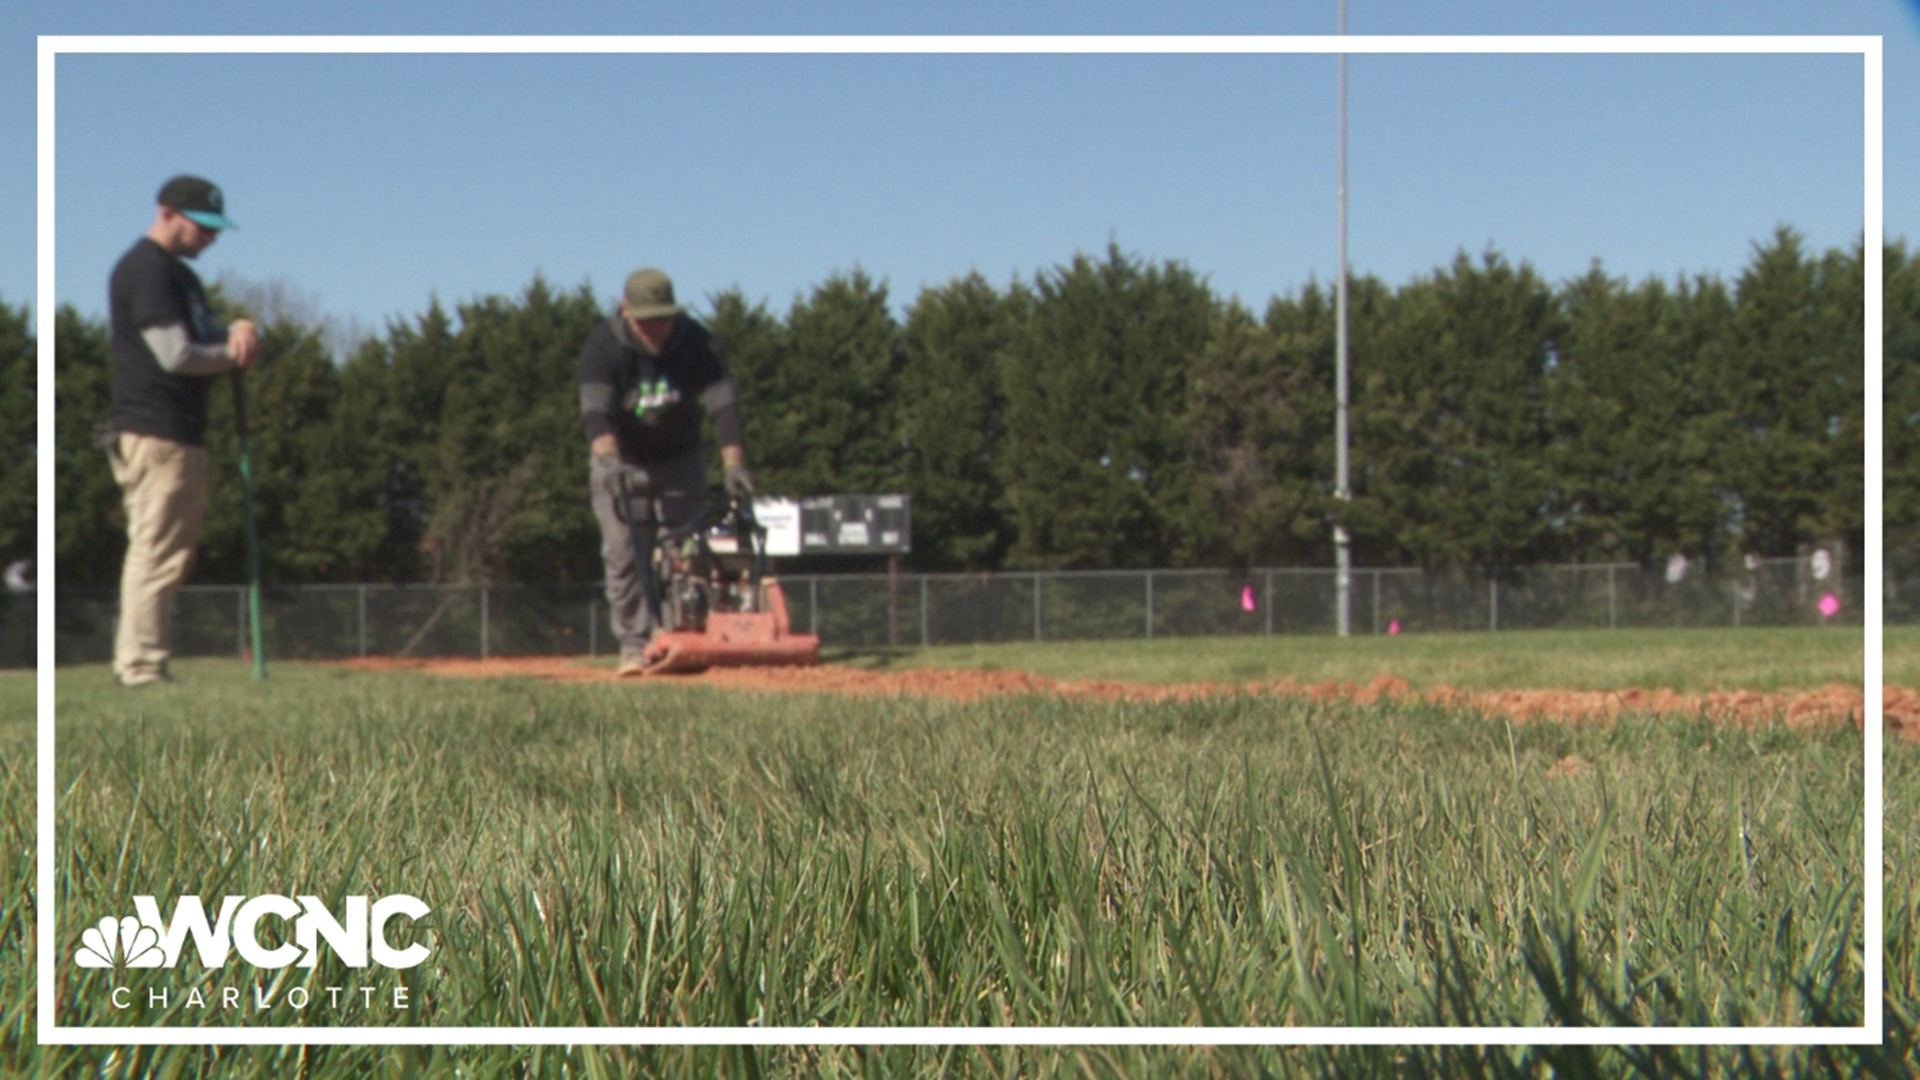 The team's "Fields For Our Future" initiative helps make sure kids can play baseball and softball on update fields.